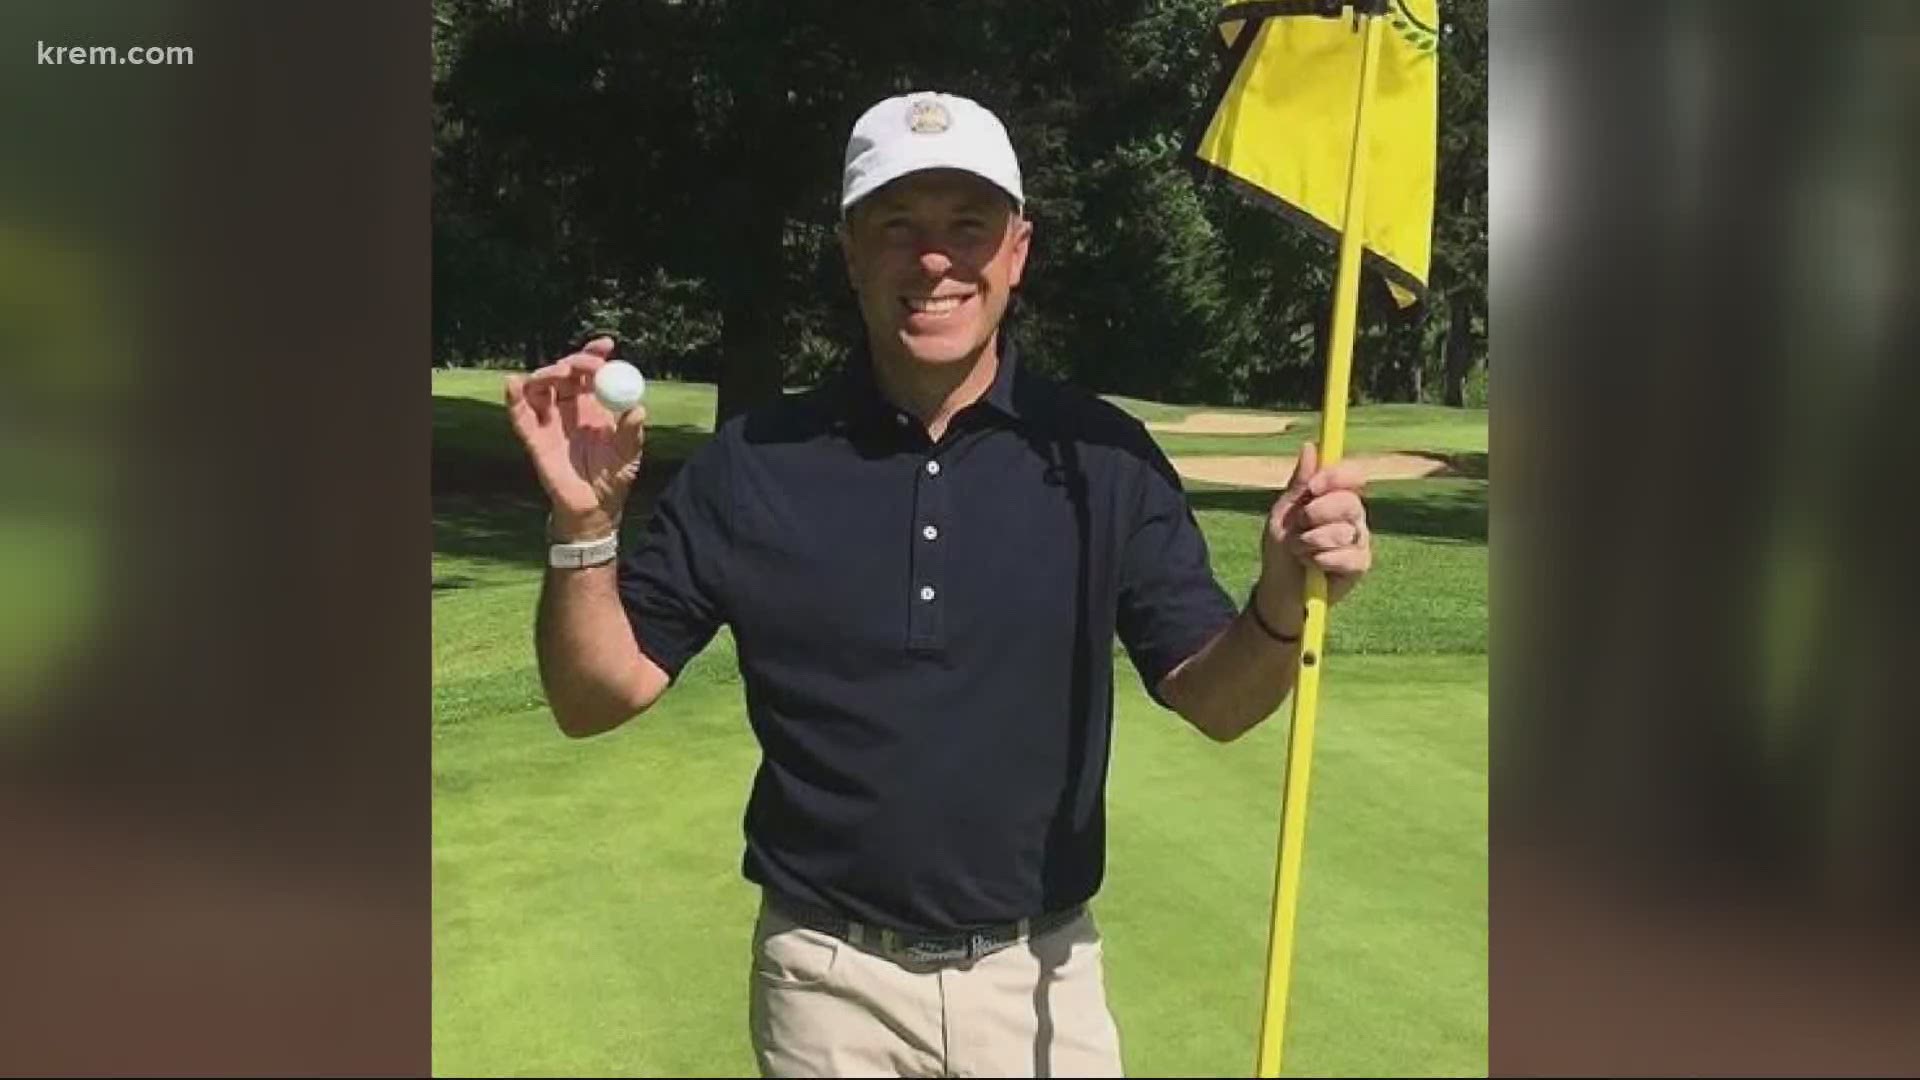 Sean Frederickson of Lake Oswego, Oregon, was well-known in the Professional Golf Association and his death is having a profound impact on that community.